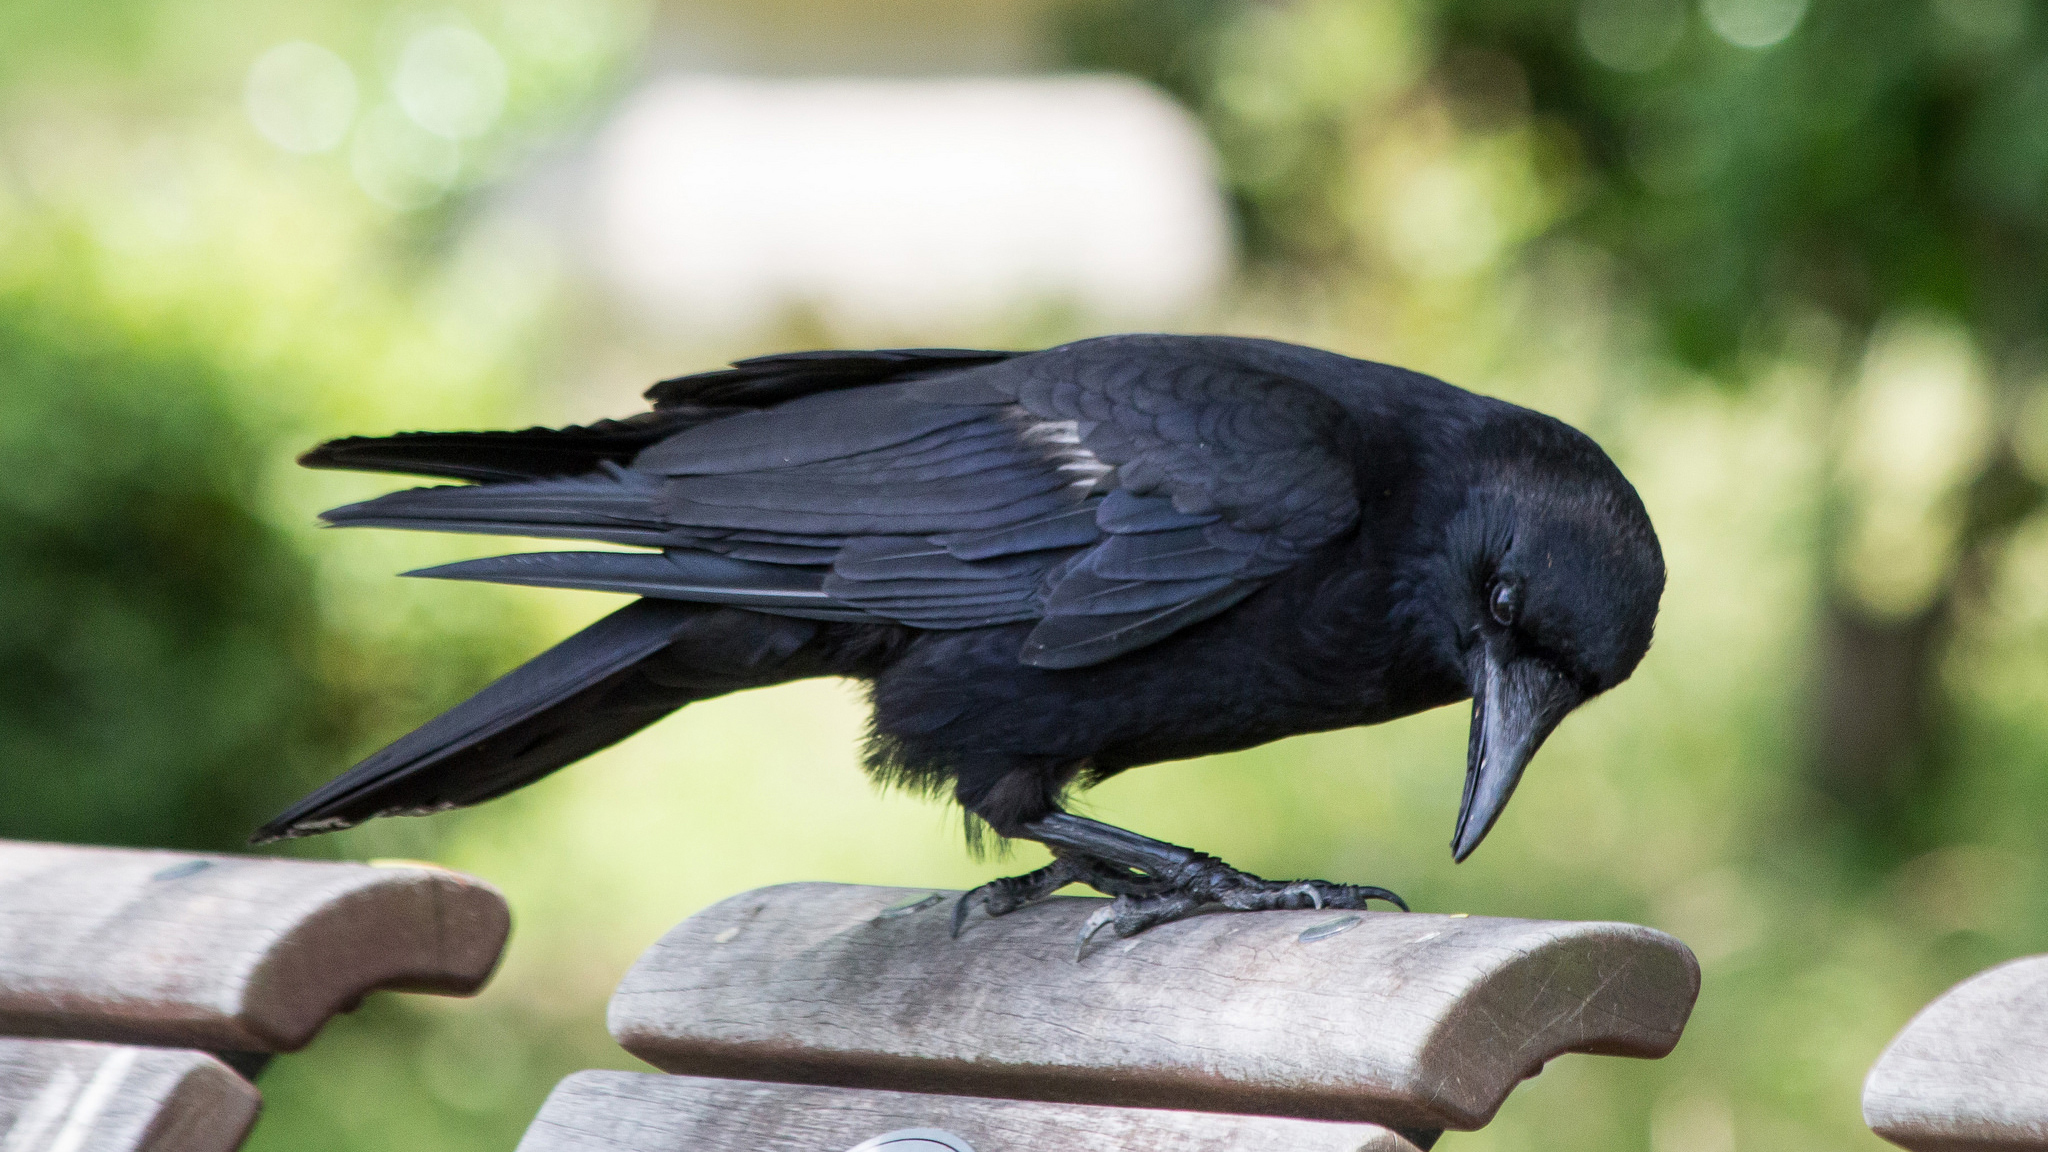 Carrion crow (Corvus corone). Photo © Geoff Whalan / Flickr through a Creative Commons license